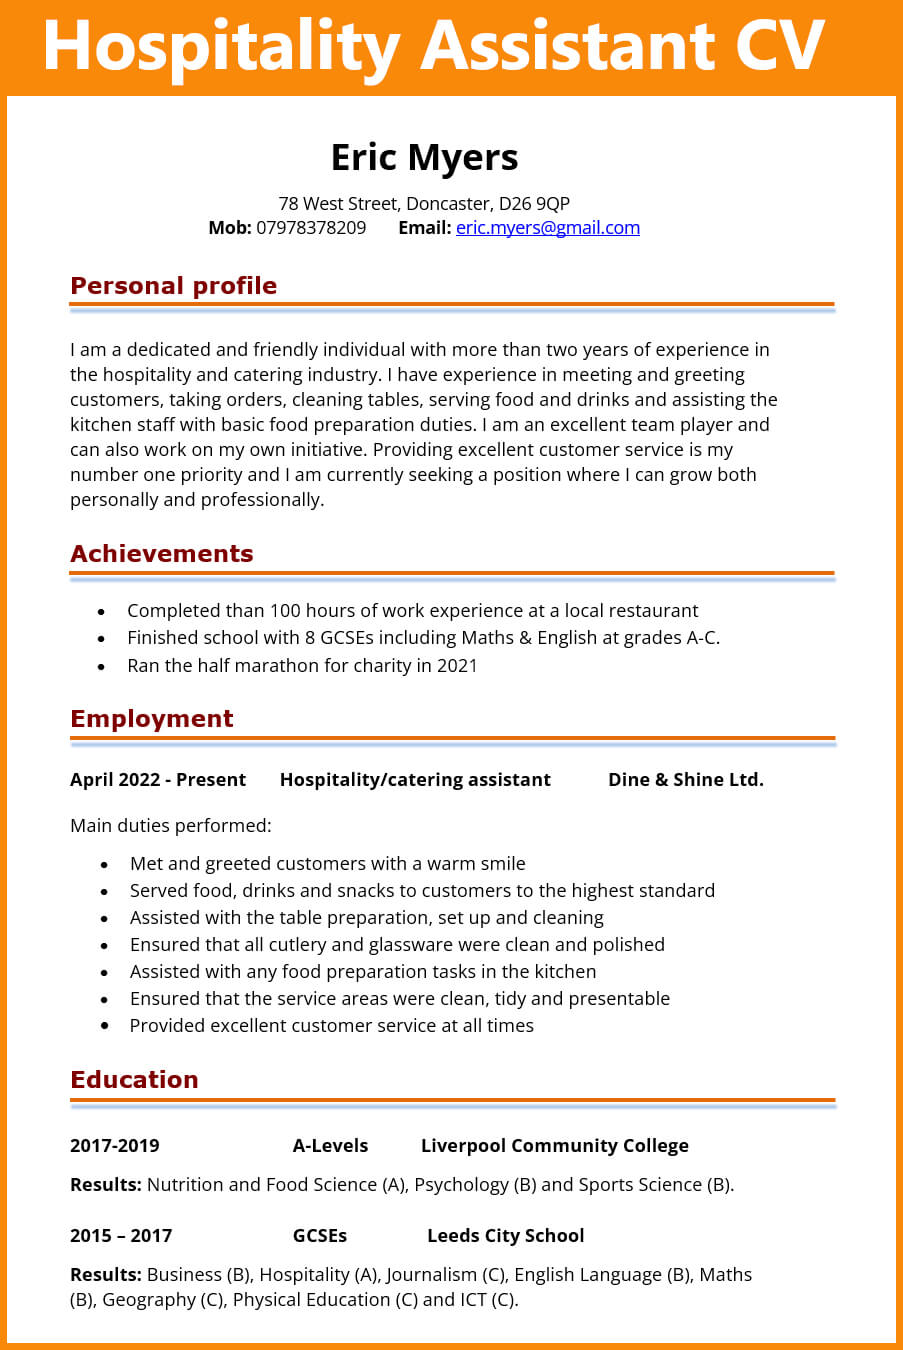 Hospitality assistant CV example 1